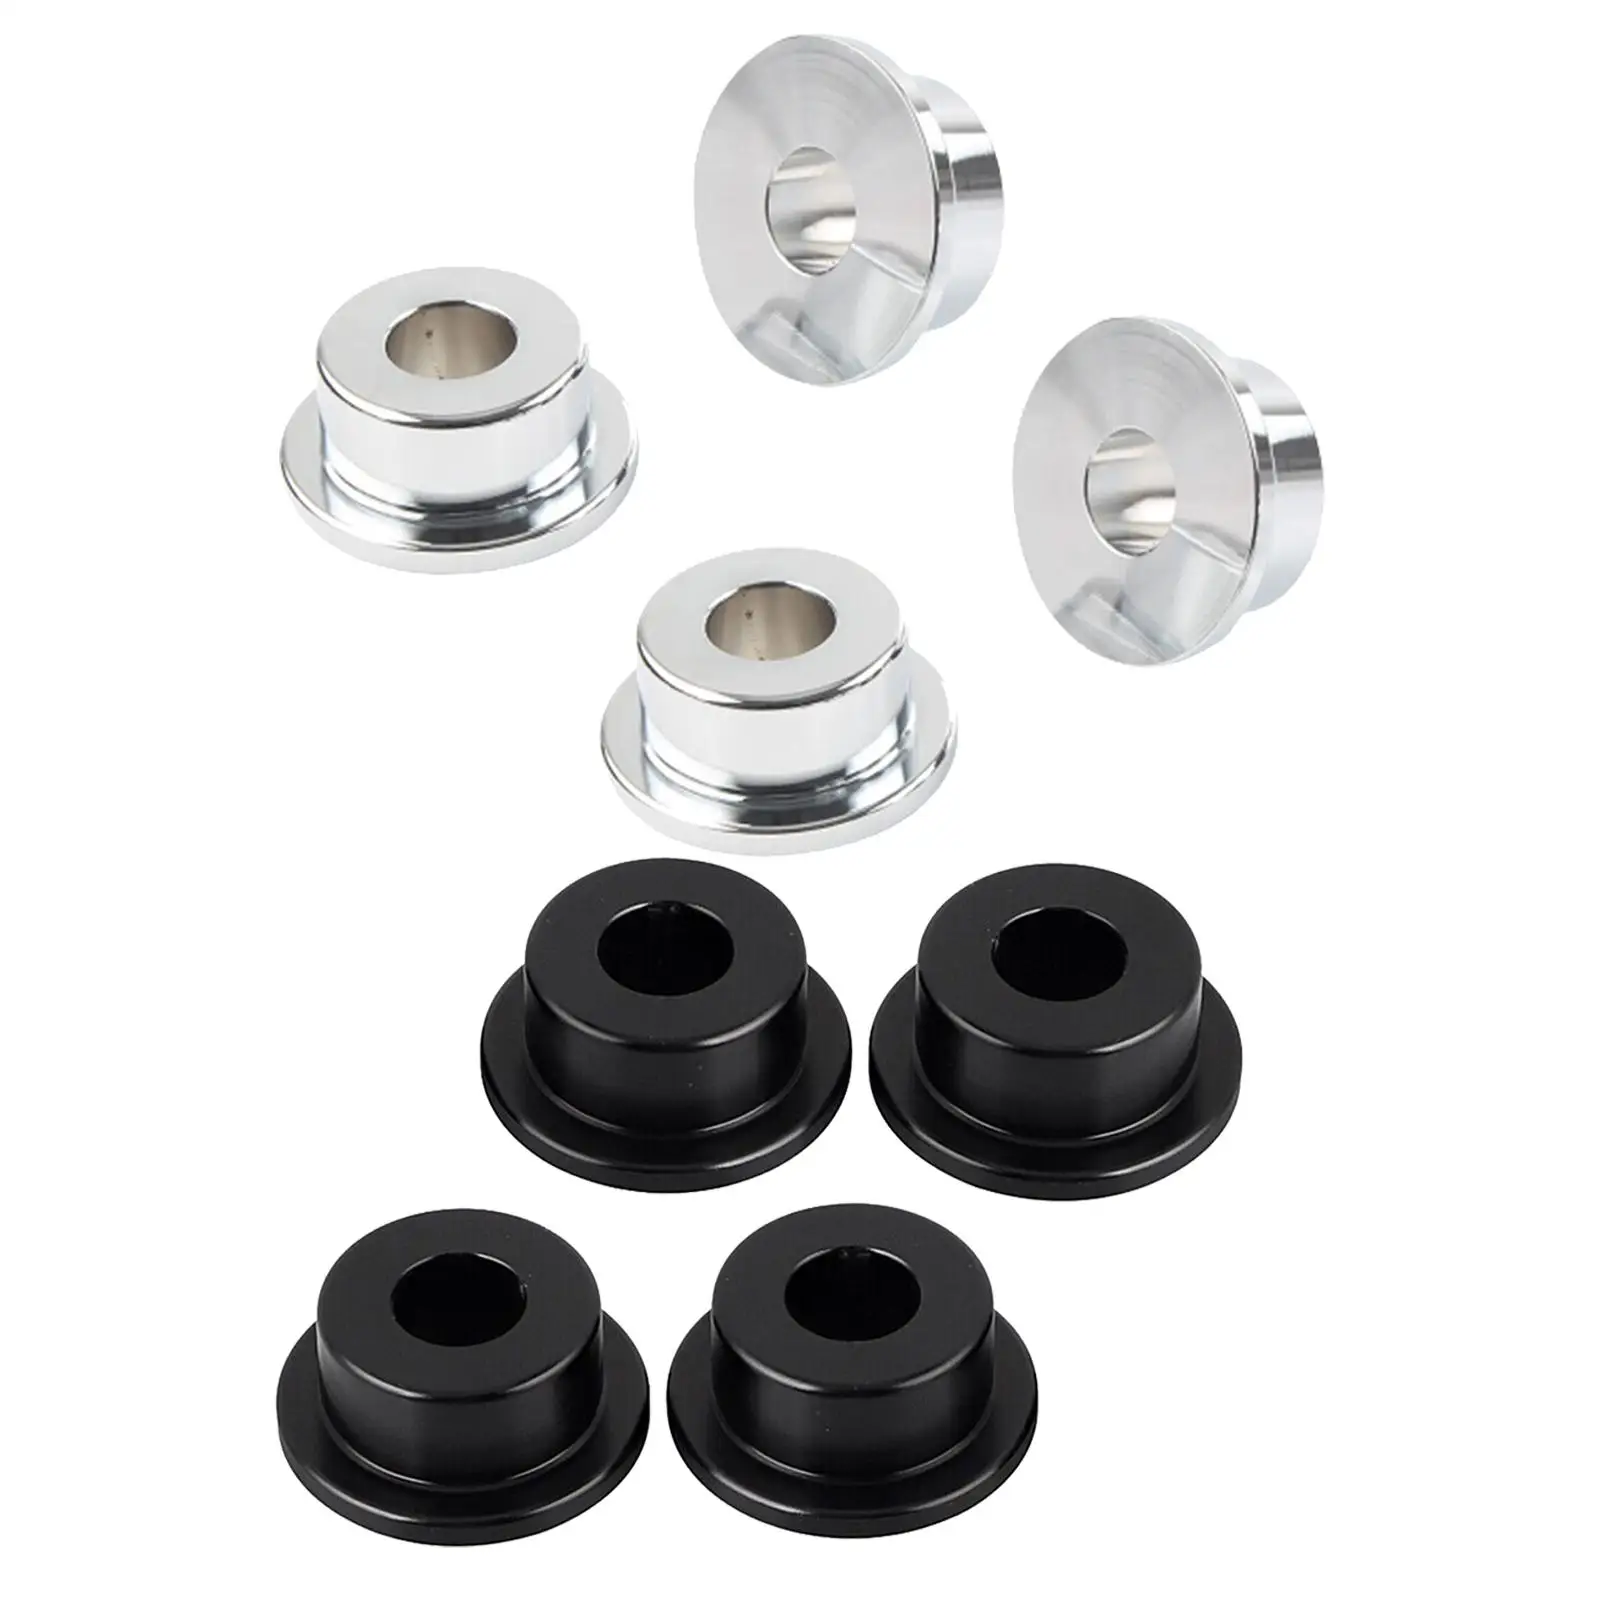 4Pcs Handlebar Riser Bushings Solid Aluminum Spare Parts for Harley Sportster Except 04-up Sportster Dyna FX Durable